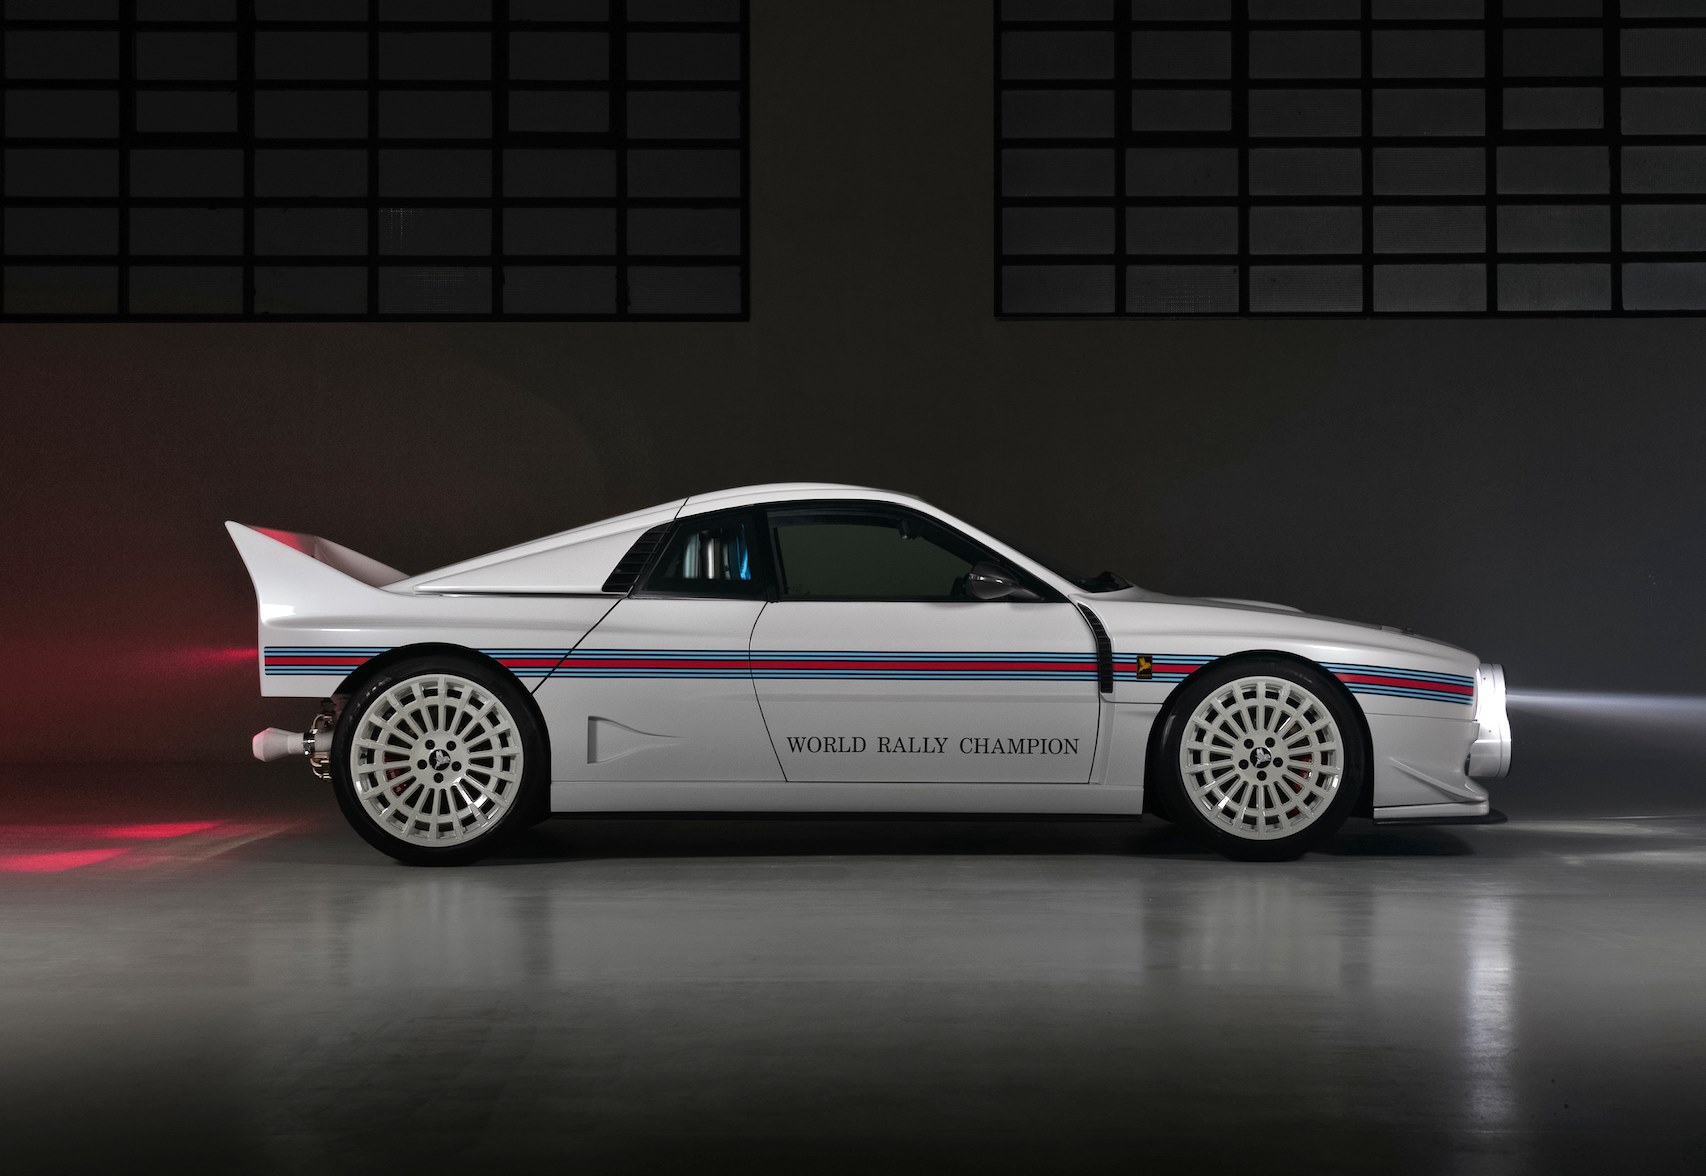 a tribute to the martini racing team’s 7 wrc titles with lancia